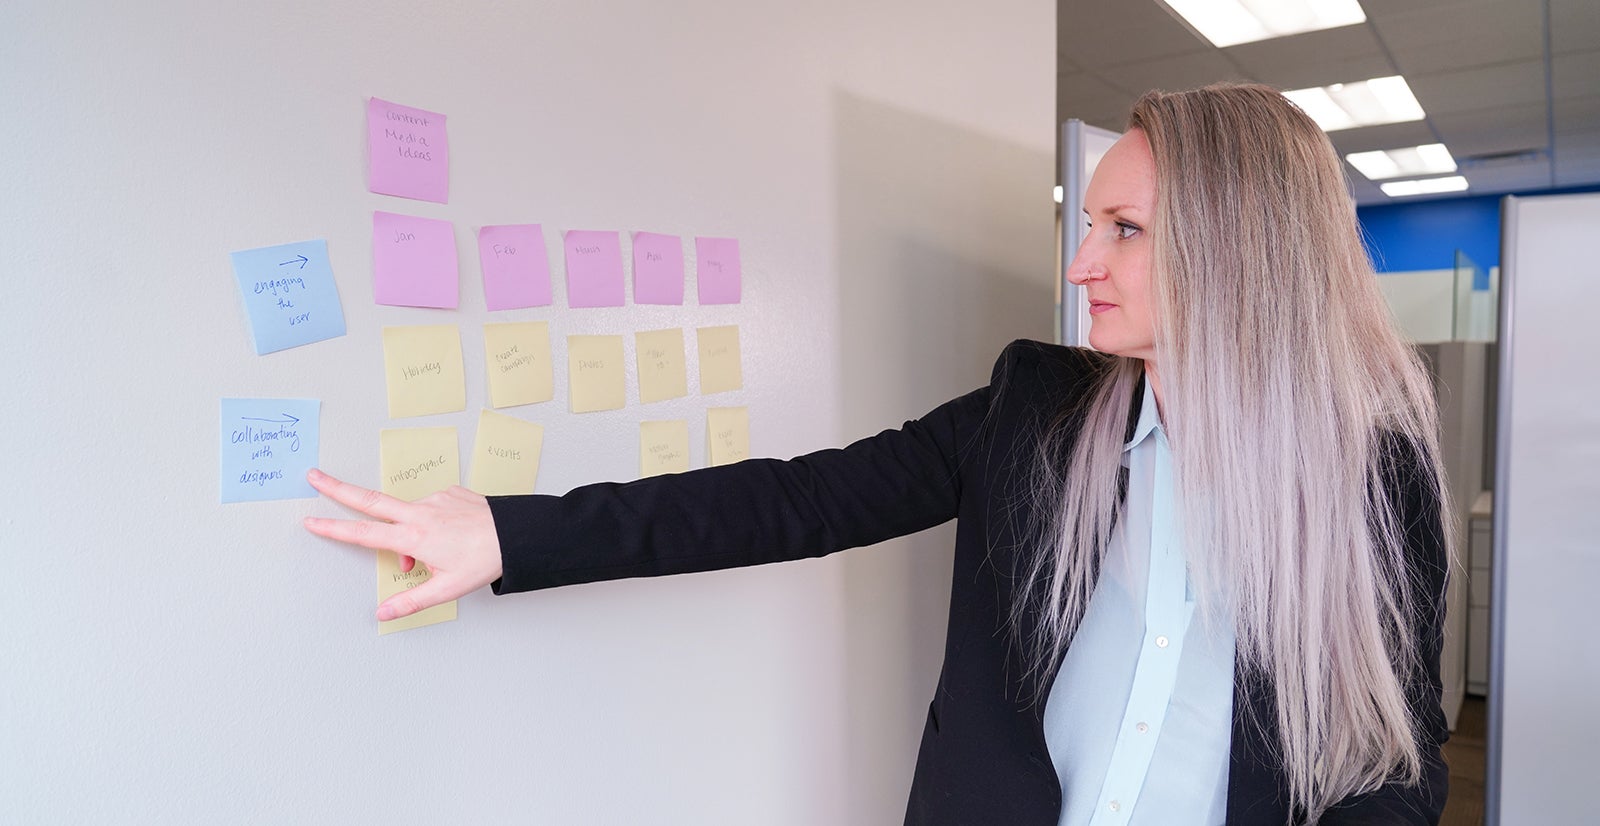 Interdisciplinary Professional Studies student, Jessi Boyer, pointing at post-it notes on a whiteboard